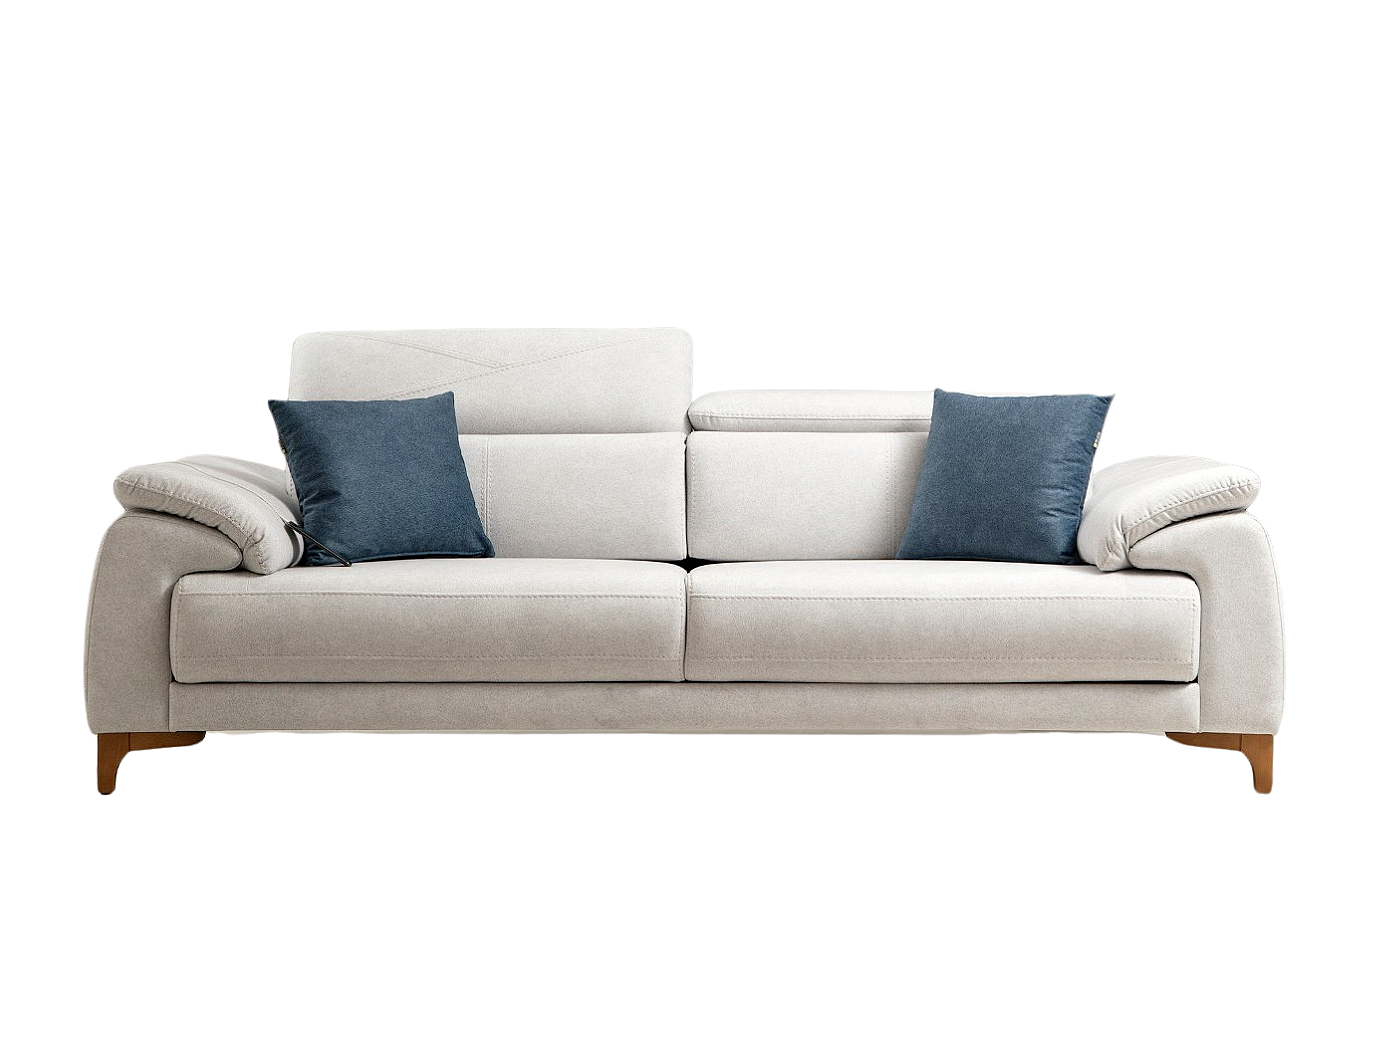 a white couch with blue pillows on it